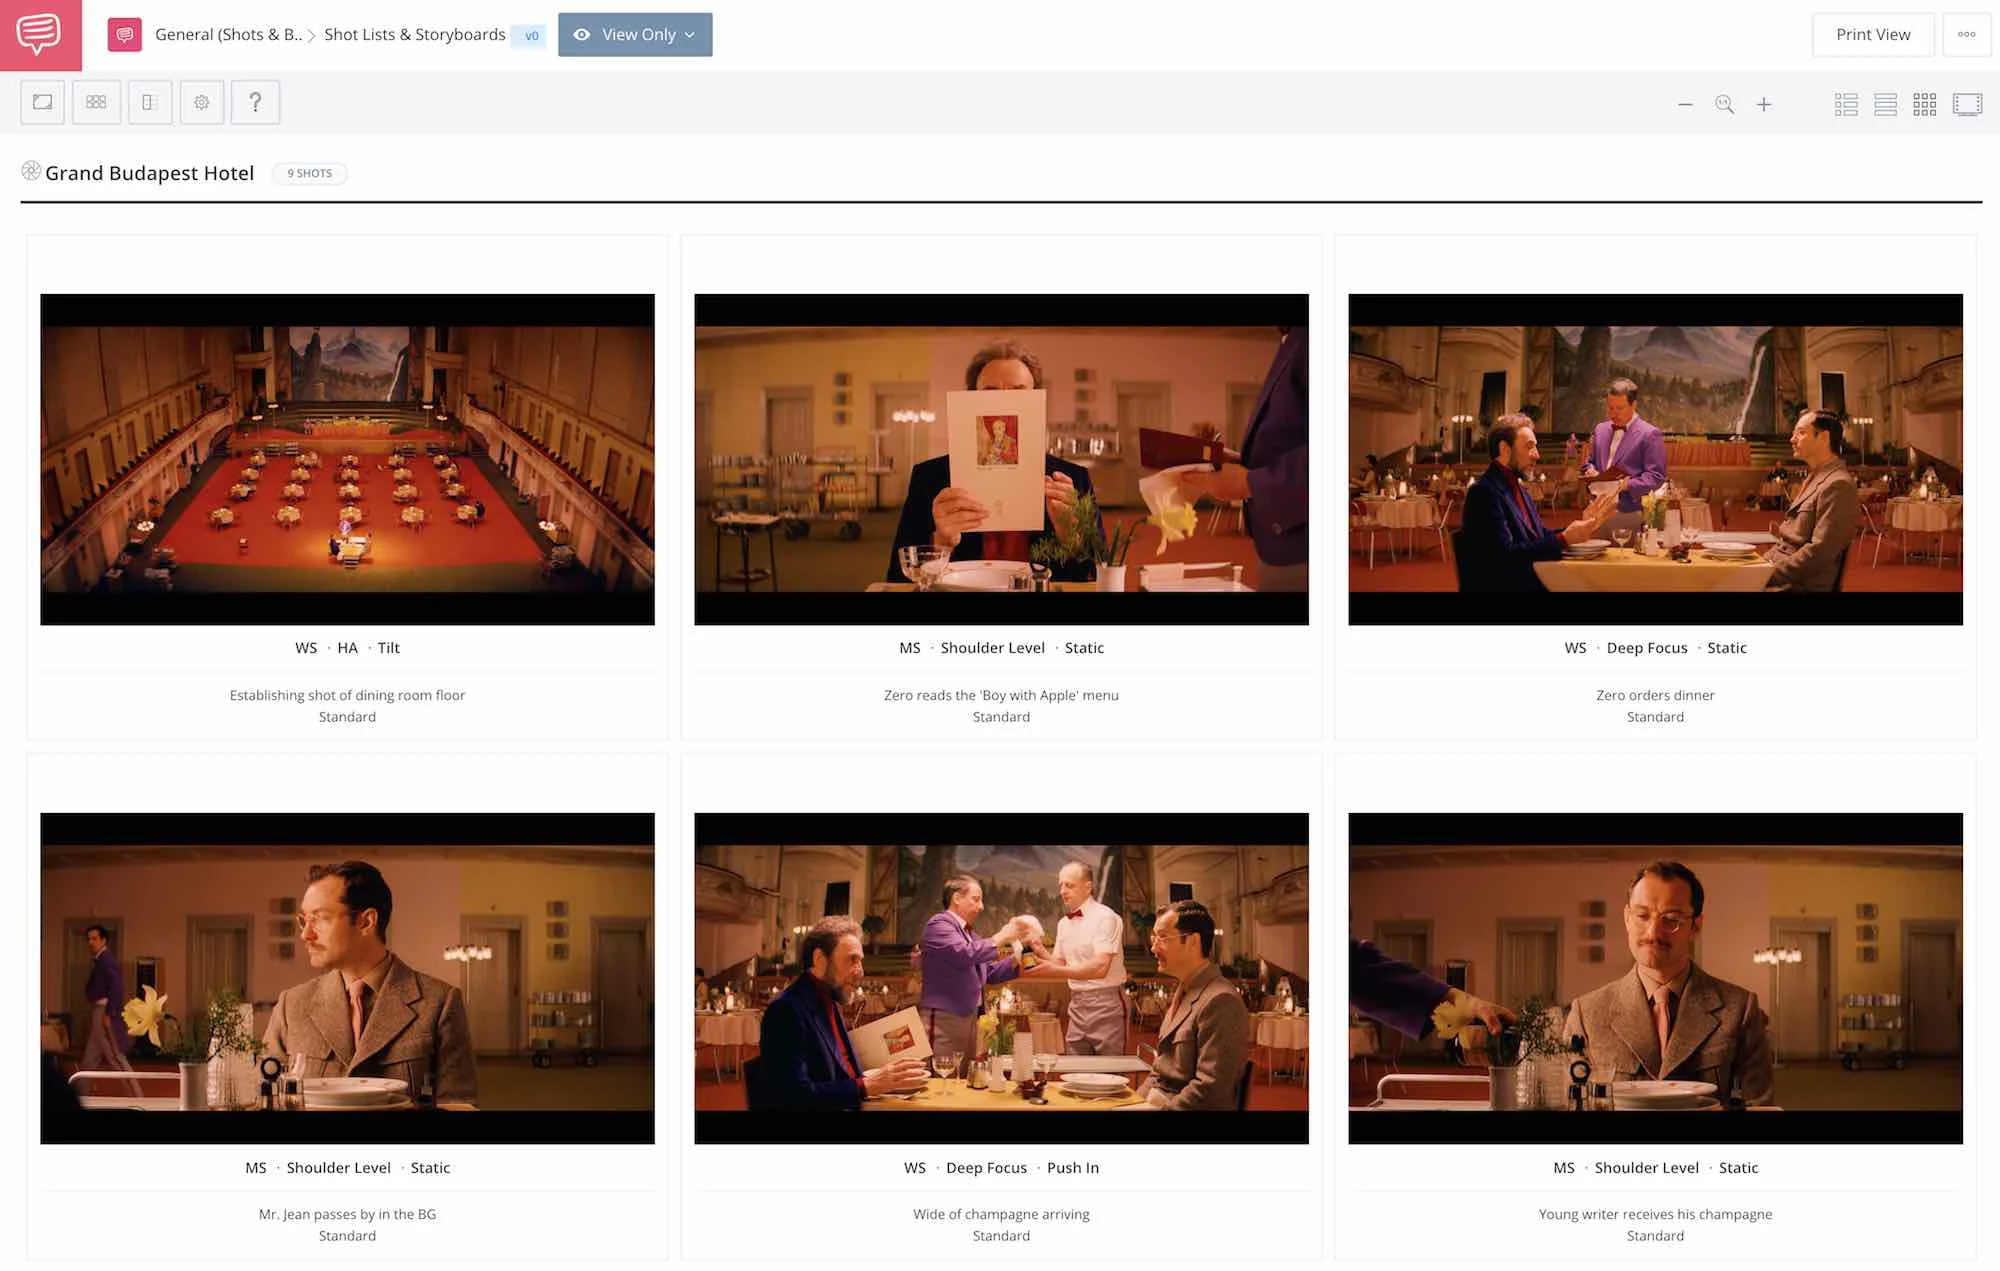 Wes Anderson Style - The Grand Budapest Hotel - Shot List - StudioBinder